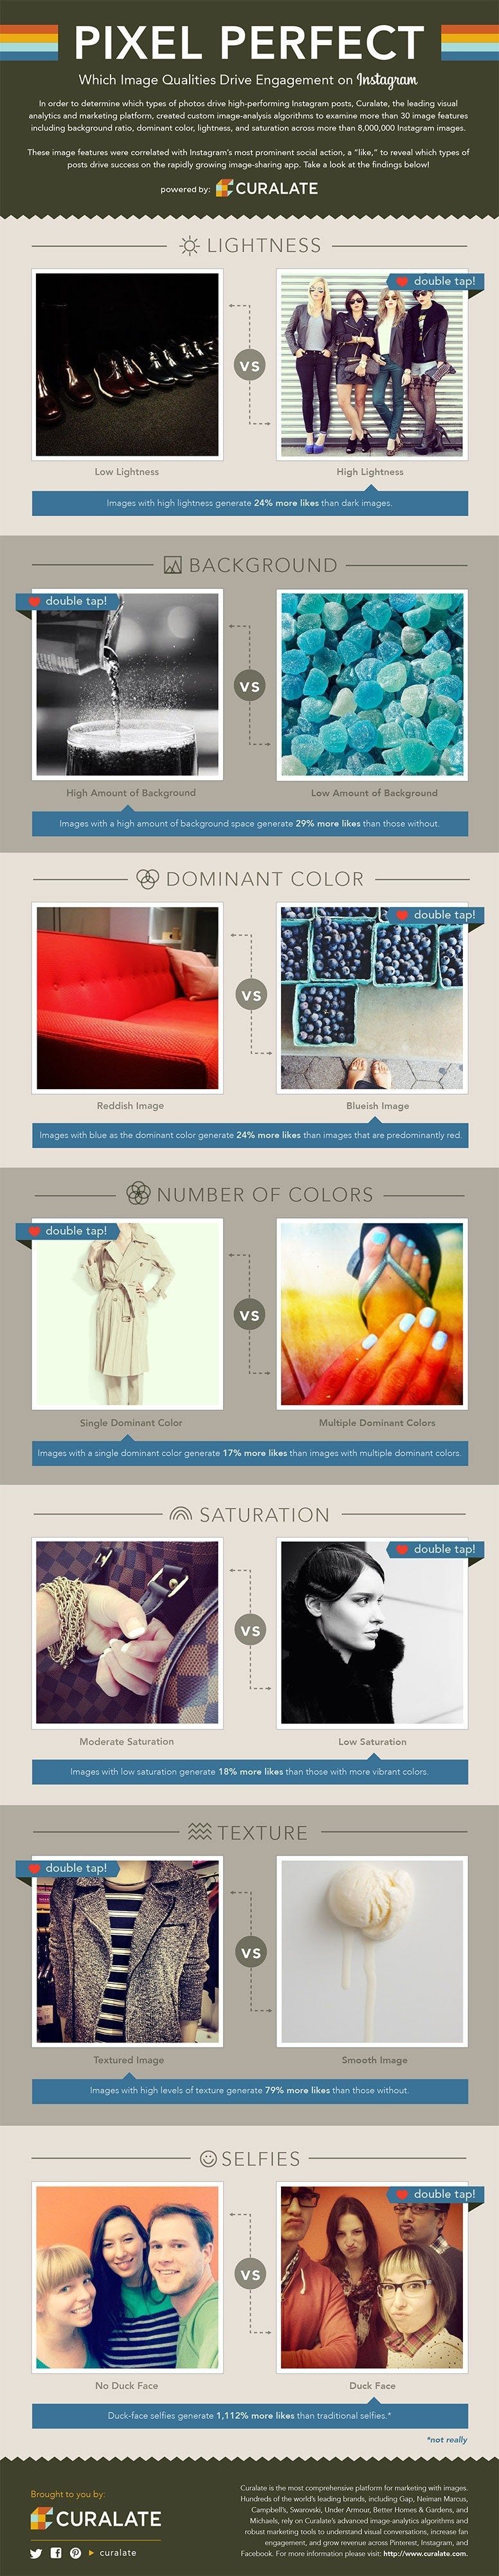 led to lower comments curalate has a great infographic with even more specific pointers on optimizing the look of your image for greater engagement - how we grew our instagram followers by 60 with user!    generated content